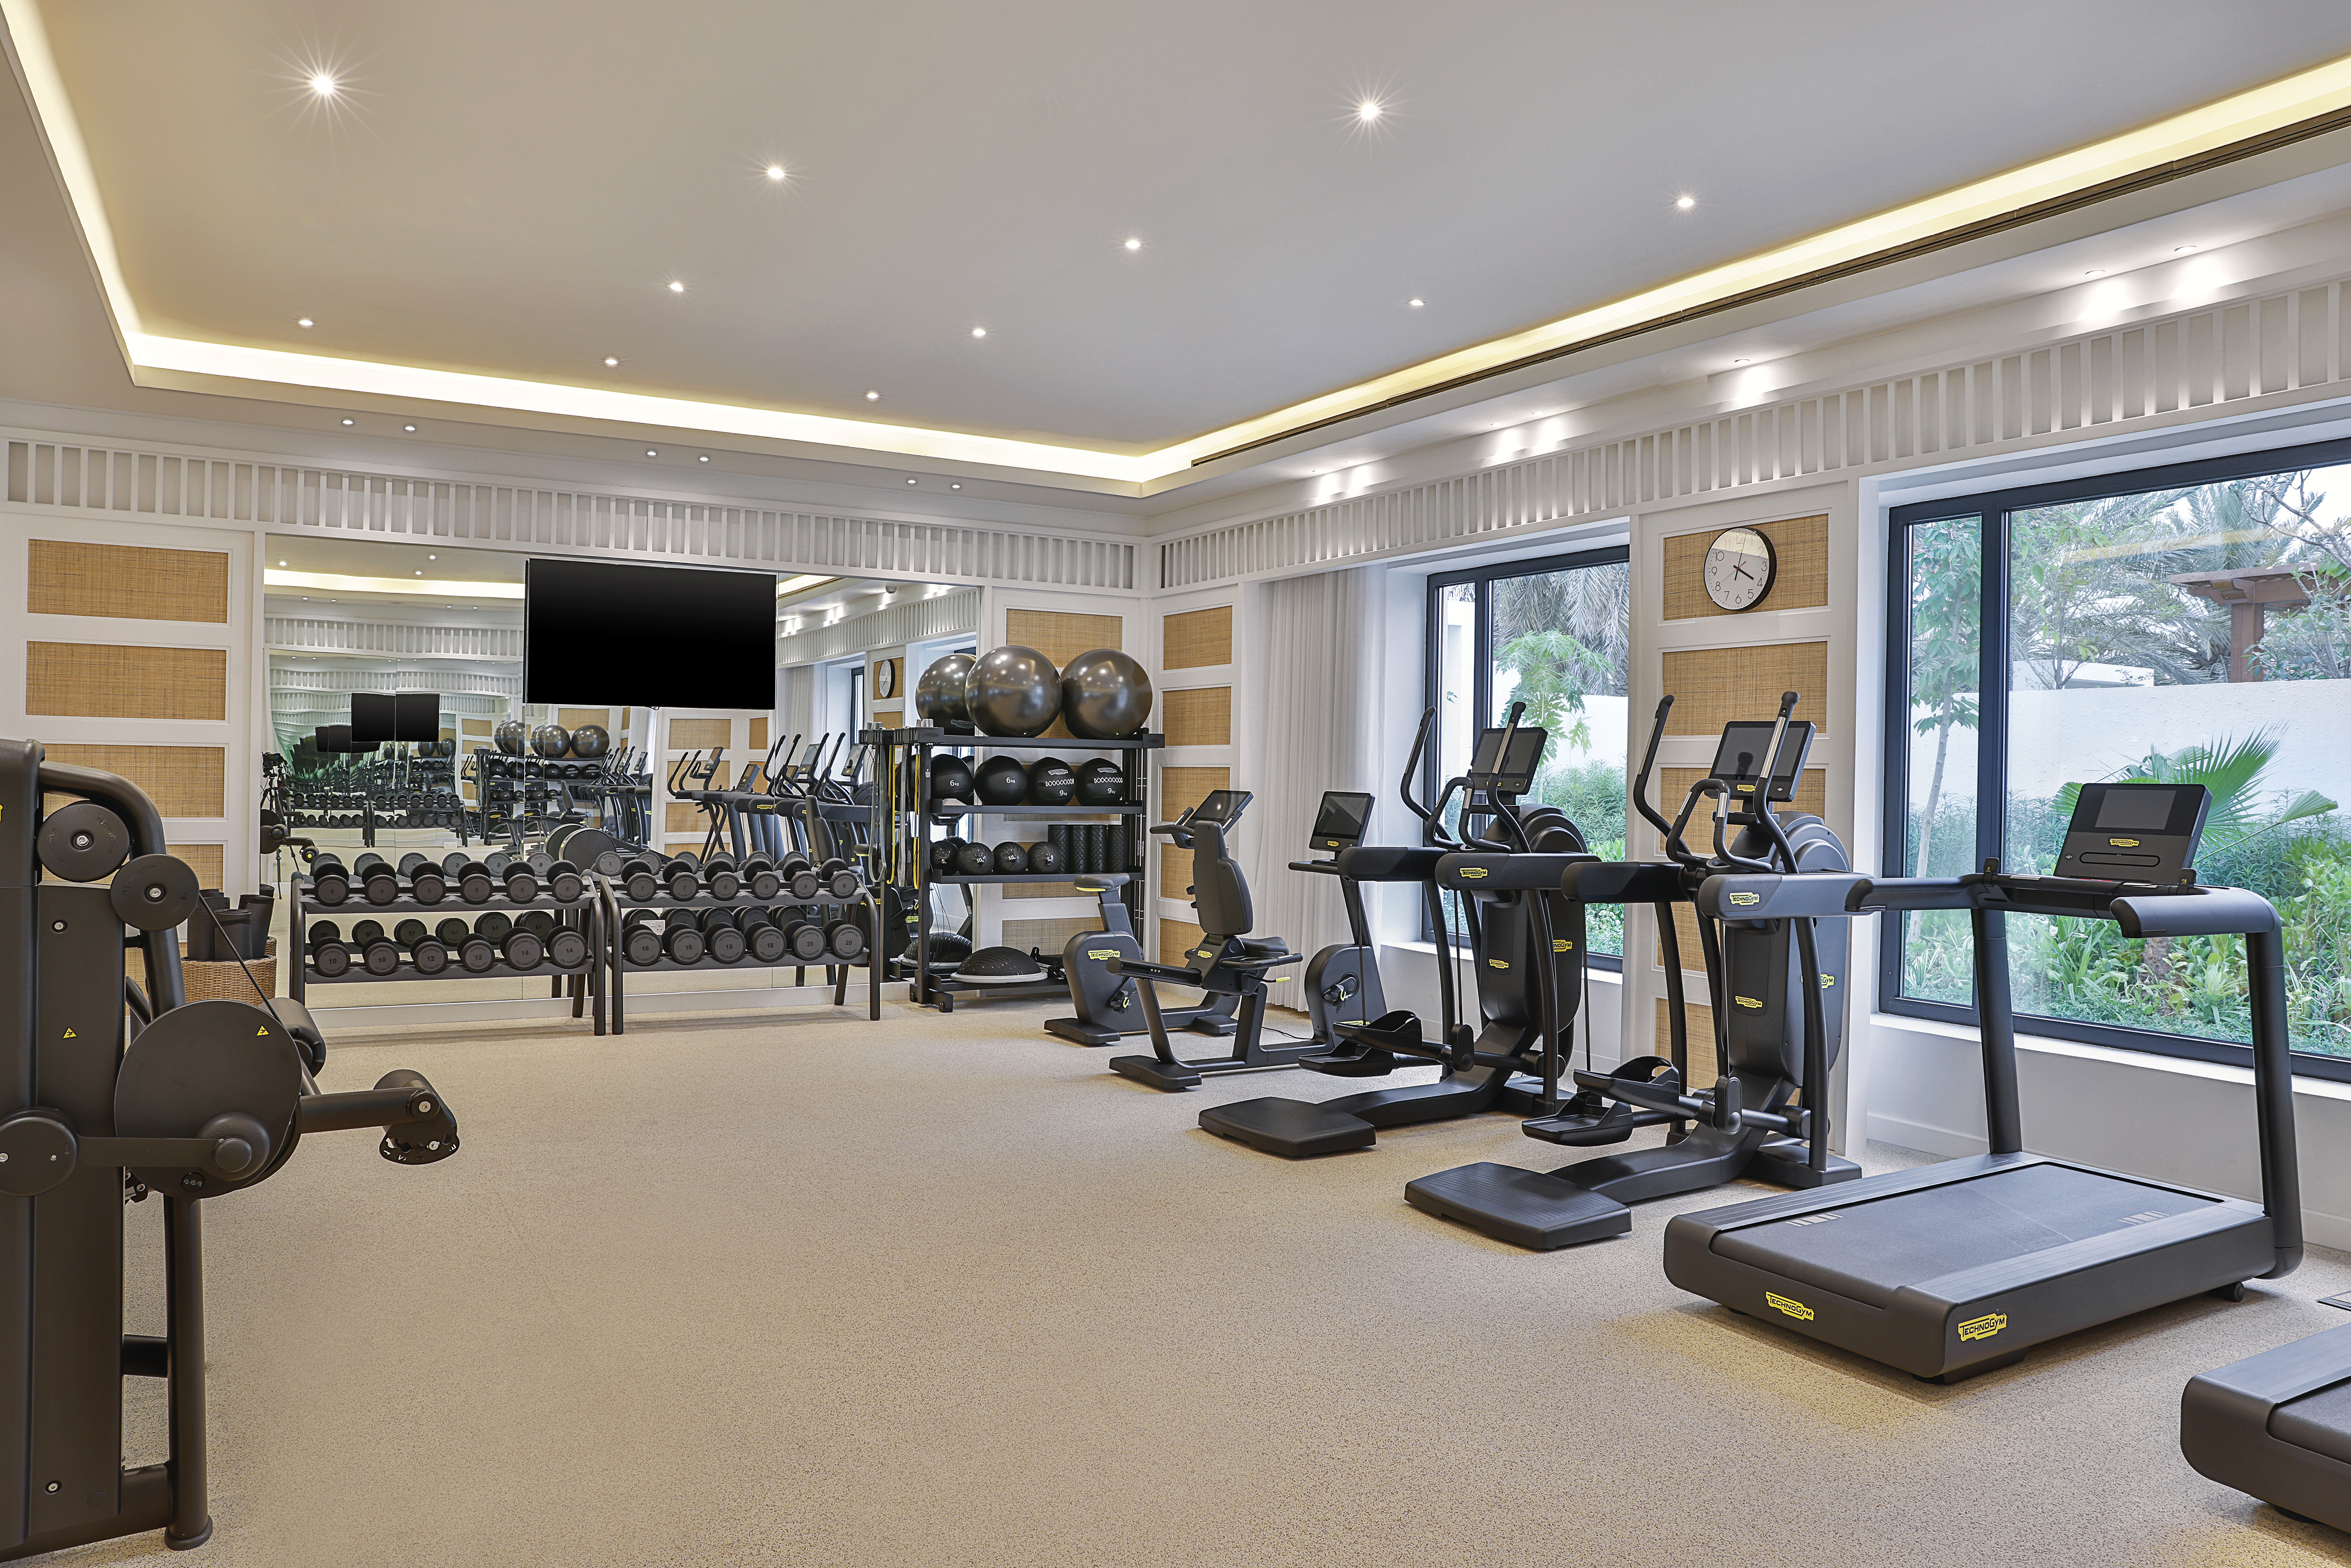 Fitness Center with Weights, Treadmills and Recumbent Bikes